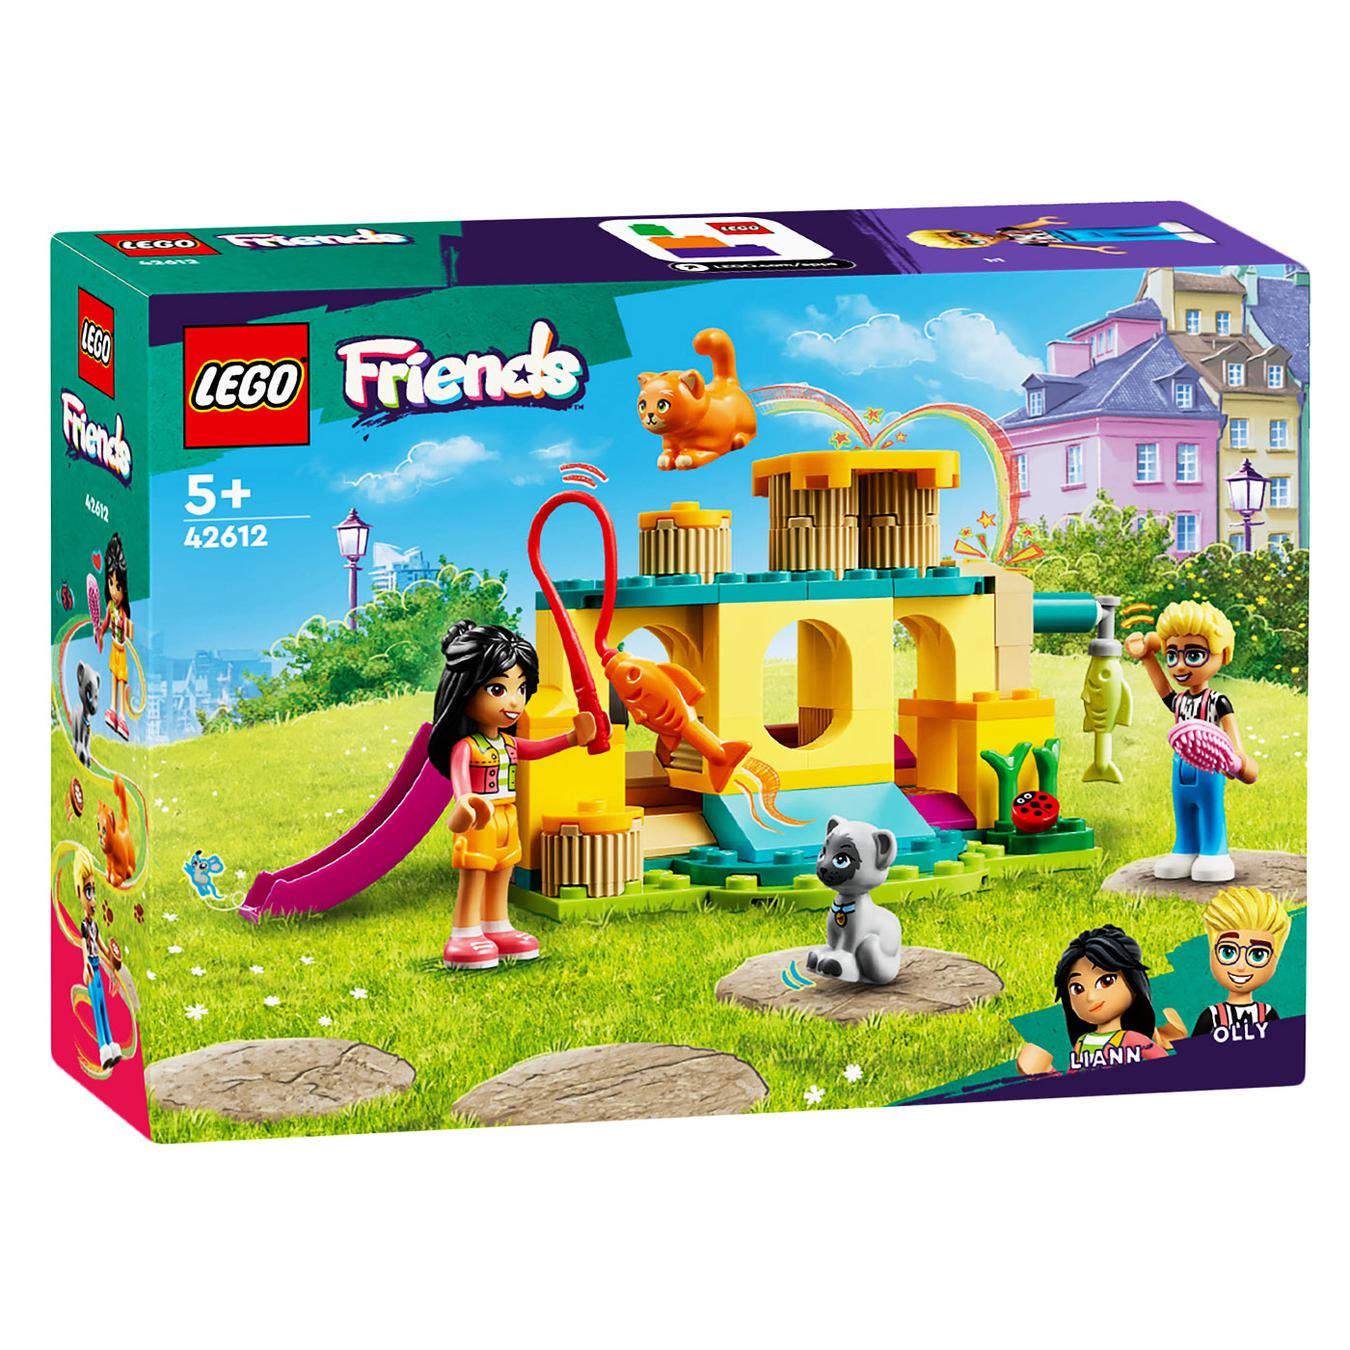 Constructor LEGO Friends 42612 Adventures on the cat playground